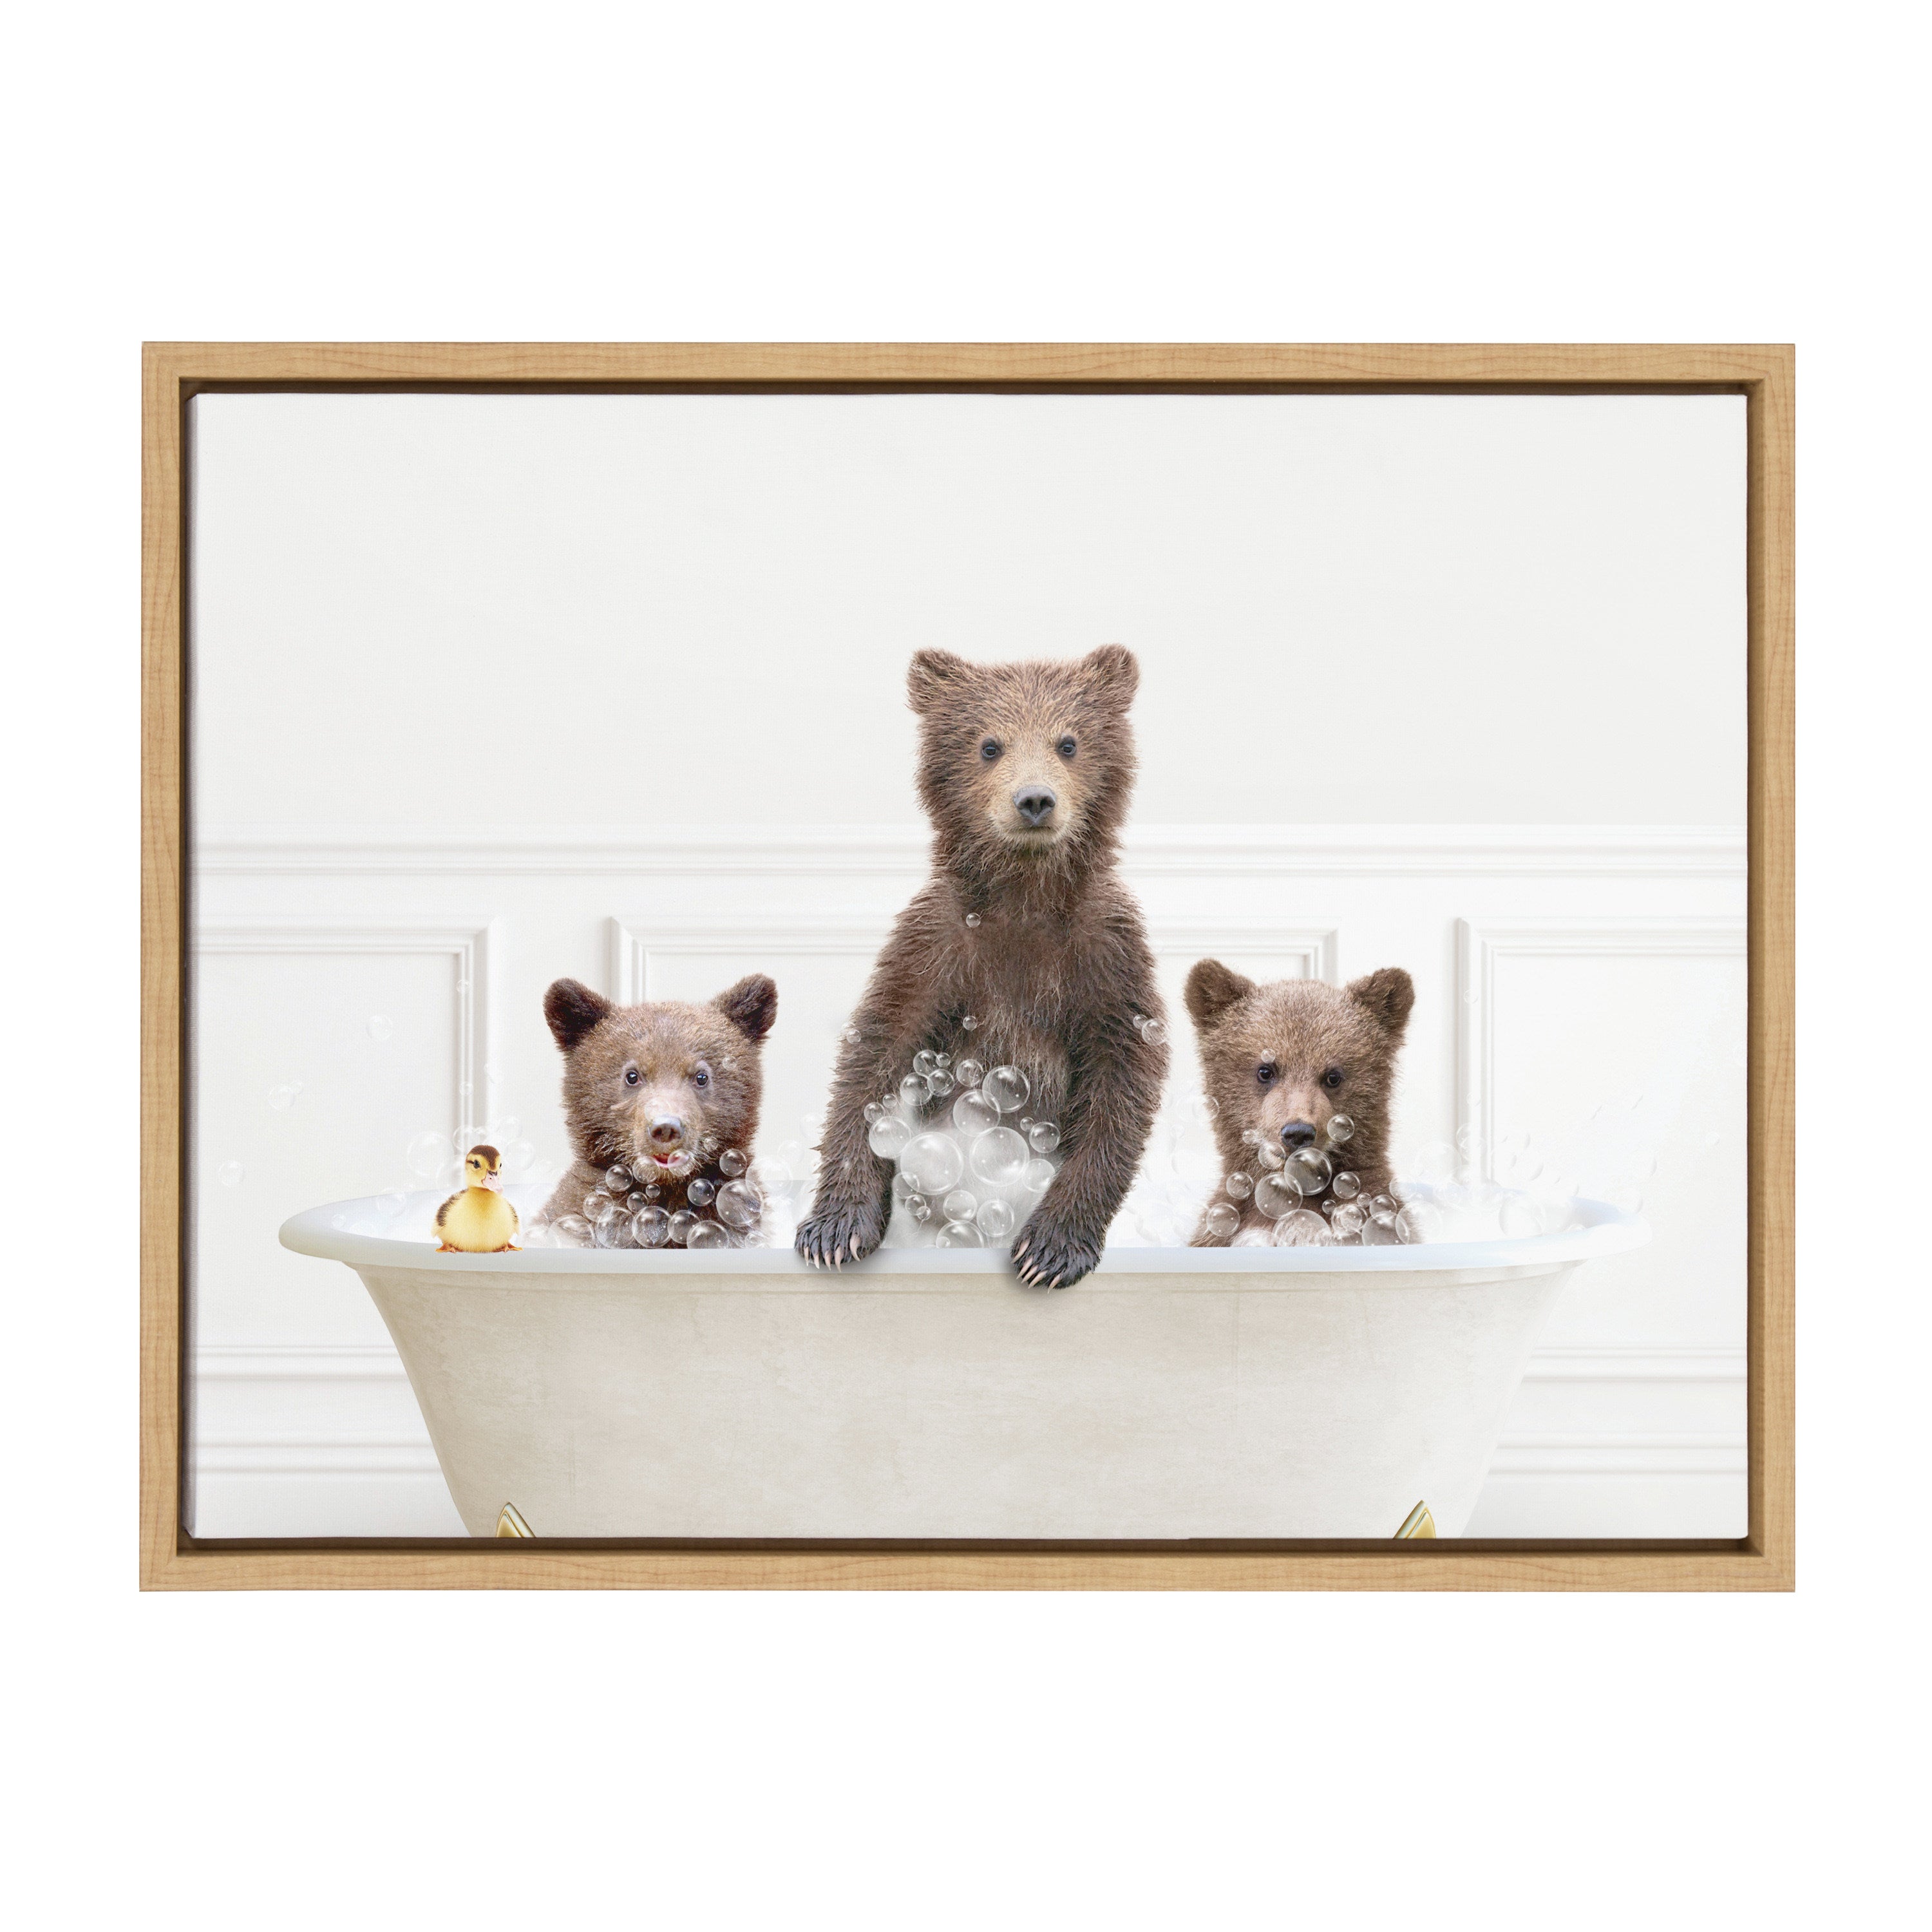 Sylvie Three bears In Bubble Bath Neutral Style Framed Canvas by Amy Peterson Art Studio